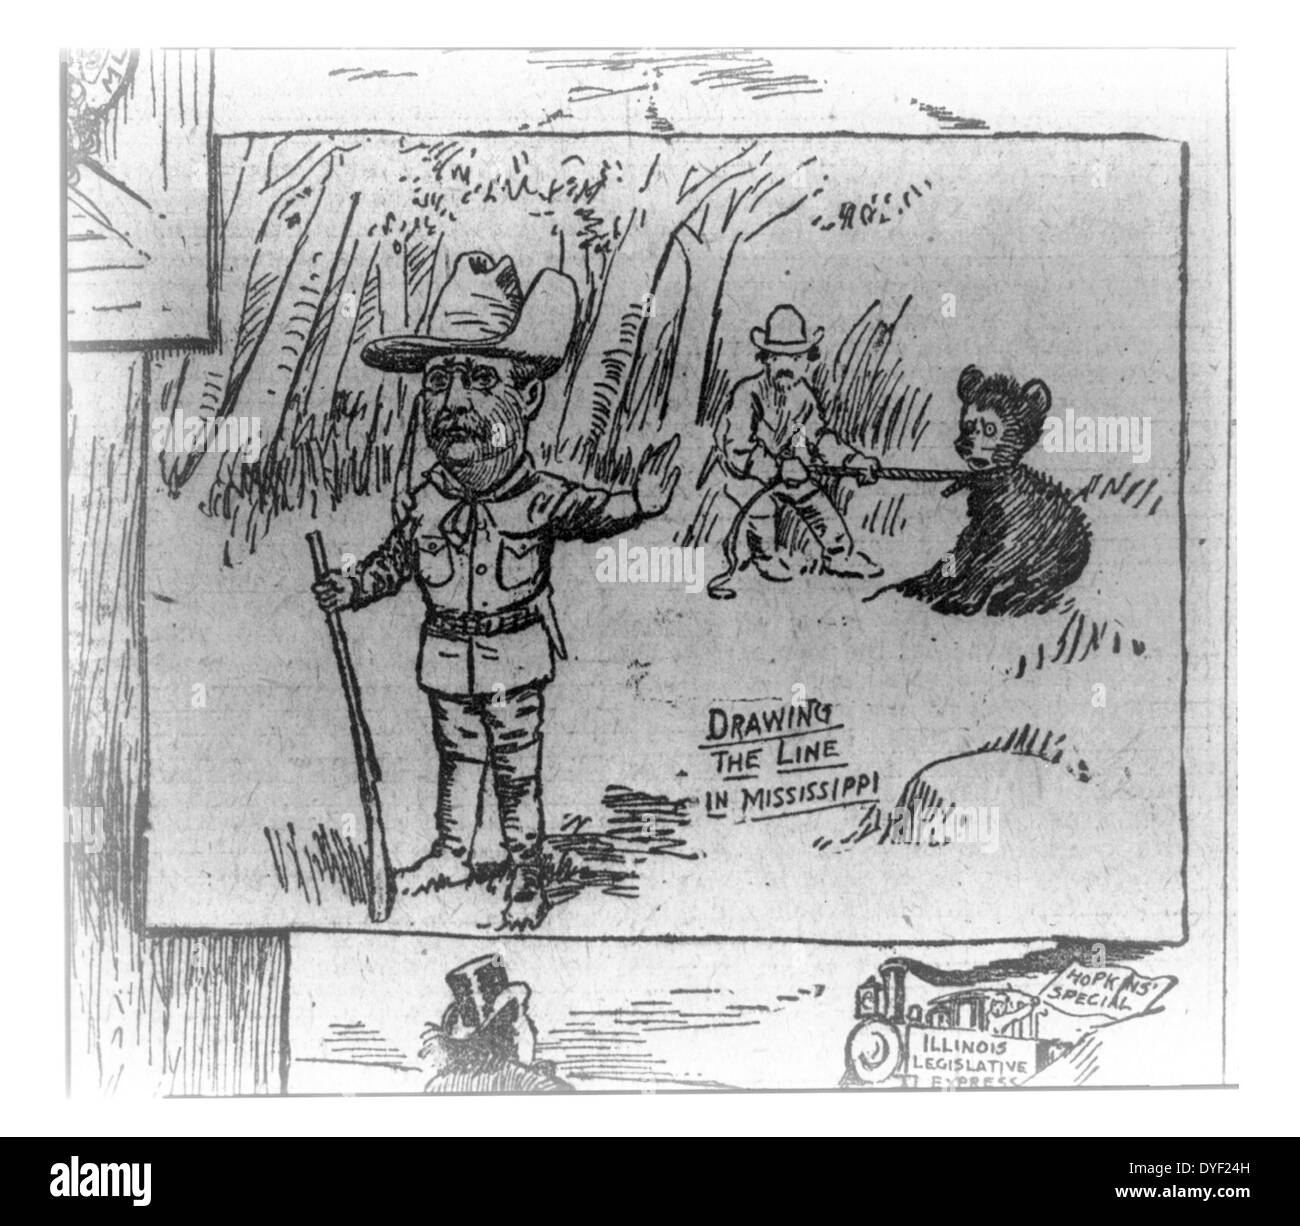 Drawing the line in Mississippi by Clifford Kennedy Berryman, 1869-1949, artist Published 1902. Photograph reproduces a newspaper cartoon in the Washington Post. The cartoon is a detail from a series called 'The Passing Show' about President Theodore Roosevelt's purported refusal to shoot a chained bear while on a hunting trip in Mississippi. The little bear, Bruin, became so popular that Berryman used him frequently in later cartoons on many different topics. Although Berryman helped popularize the association of Teddy Roosevelt with bears, he did not invent the toy teddy bear. Stock Photo